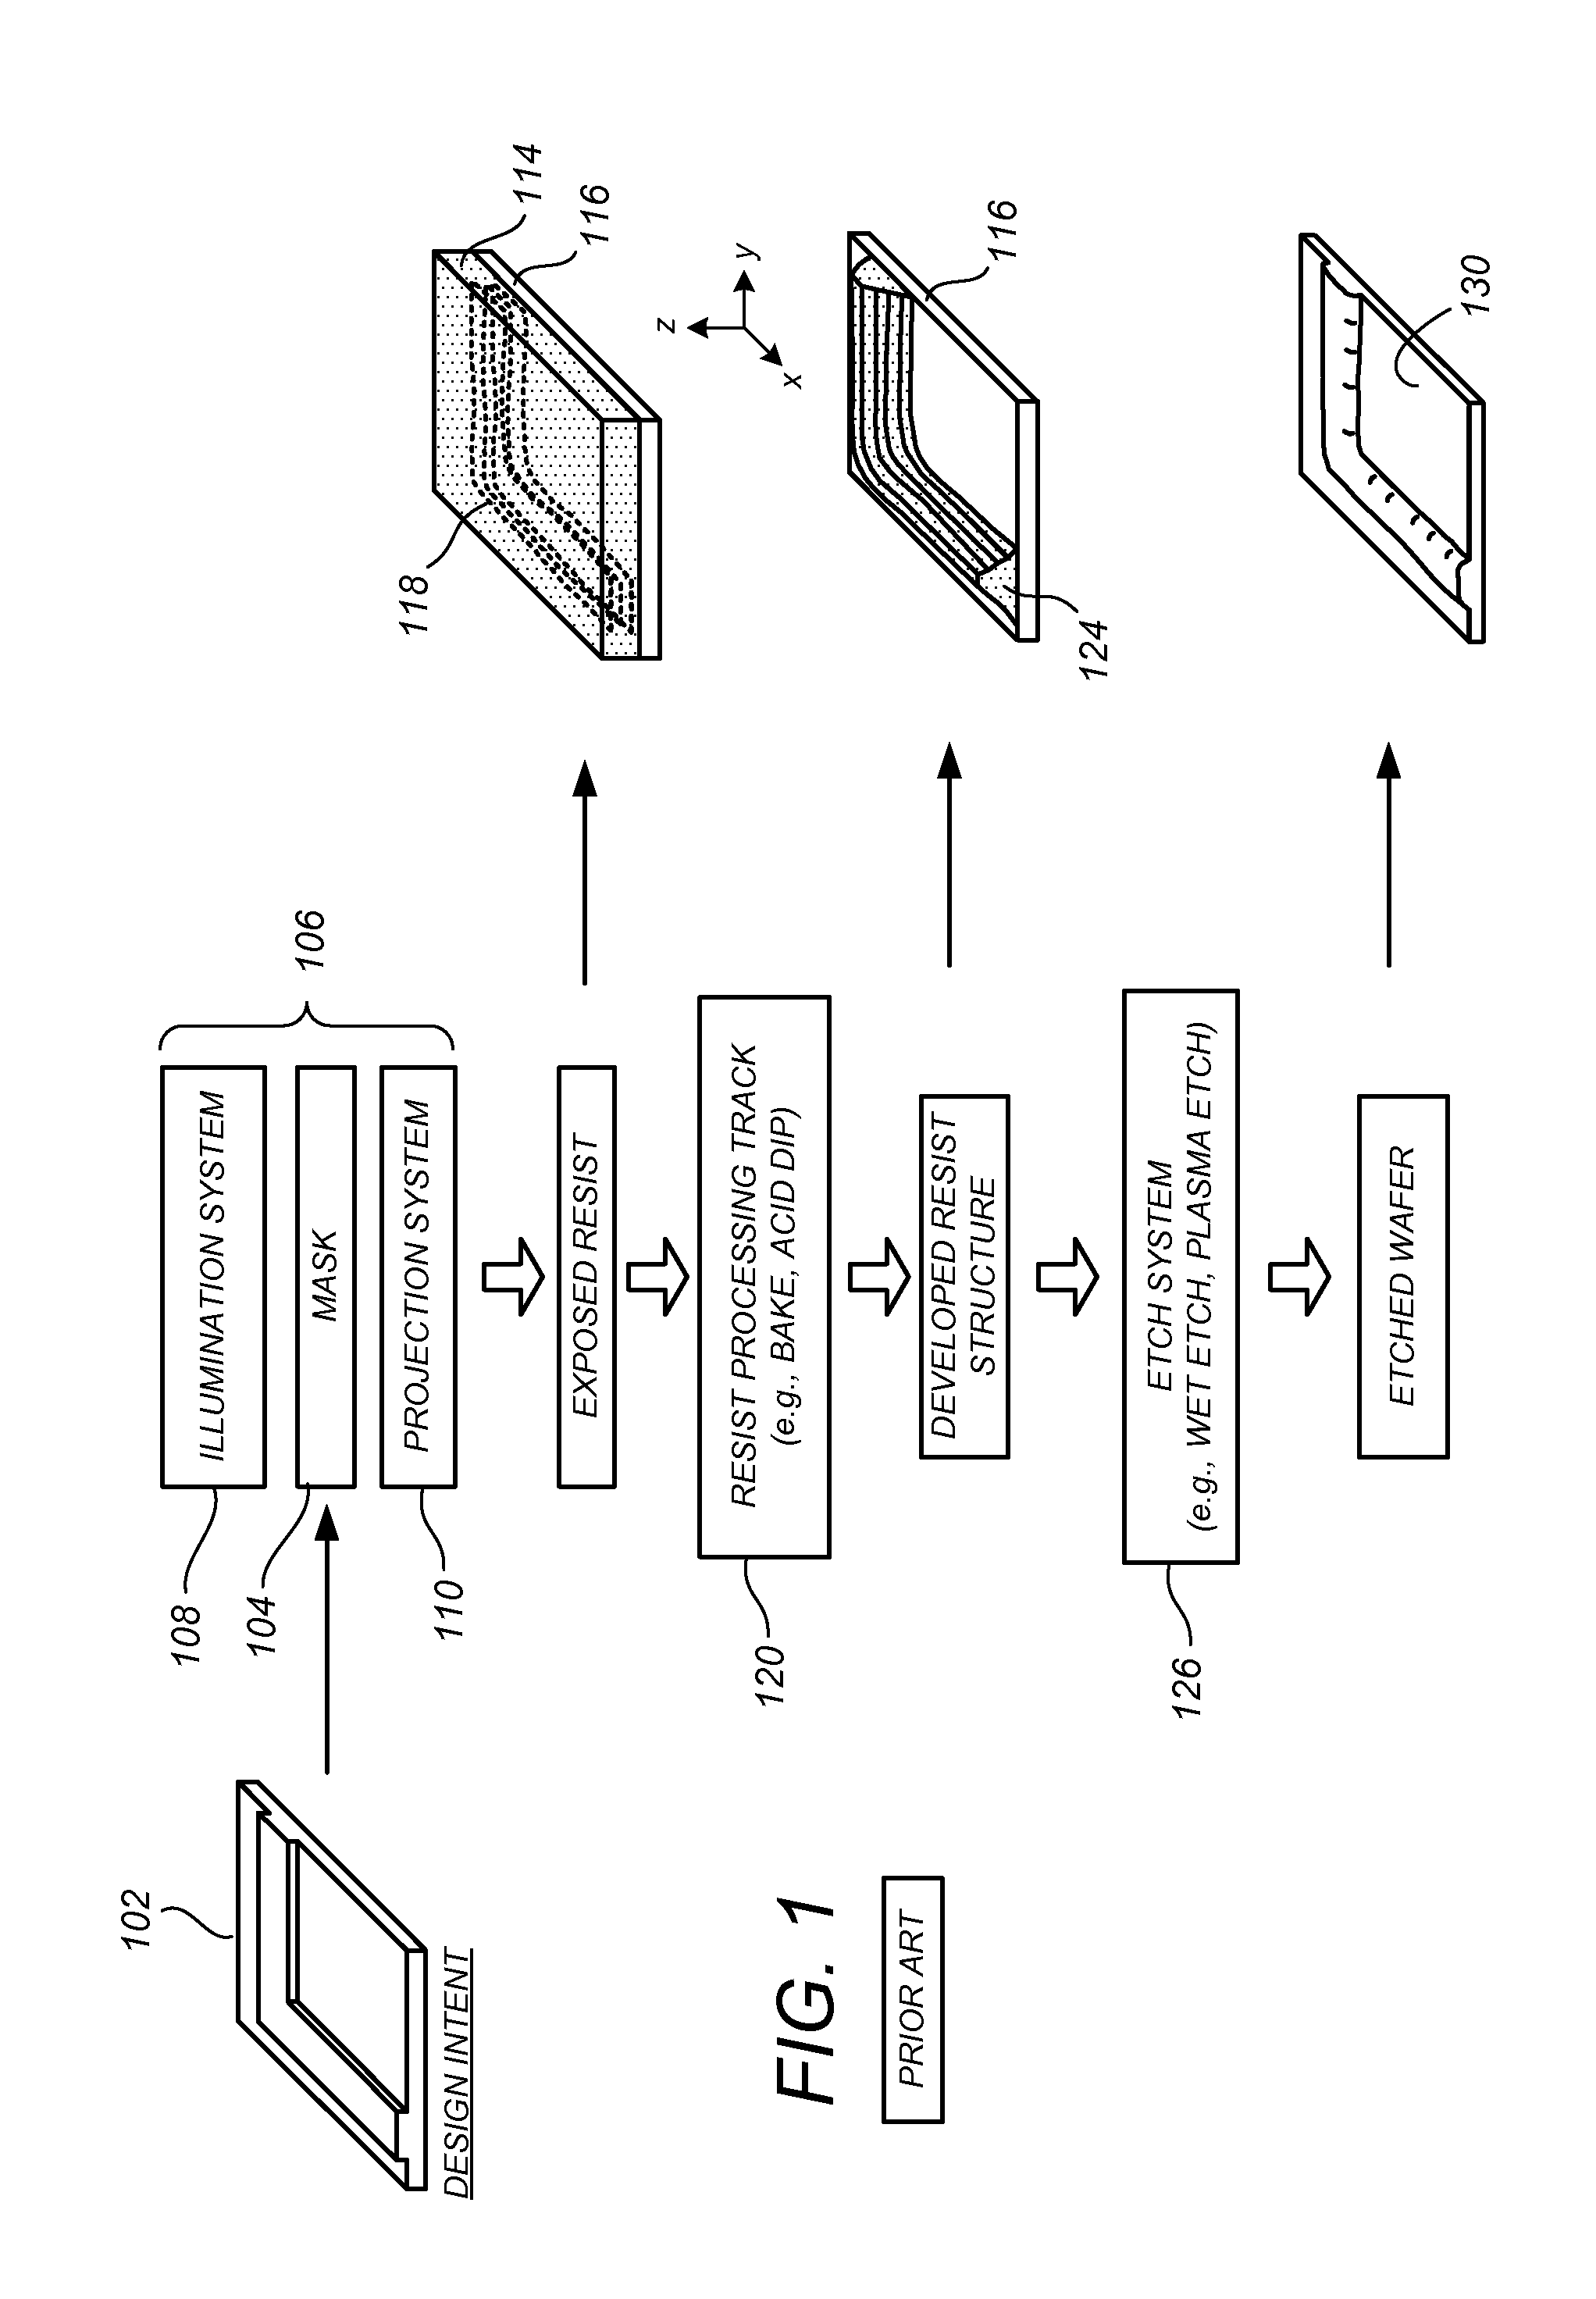 Computer simulation of photolithographic processing